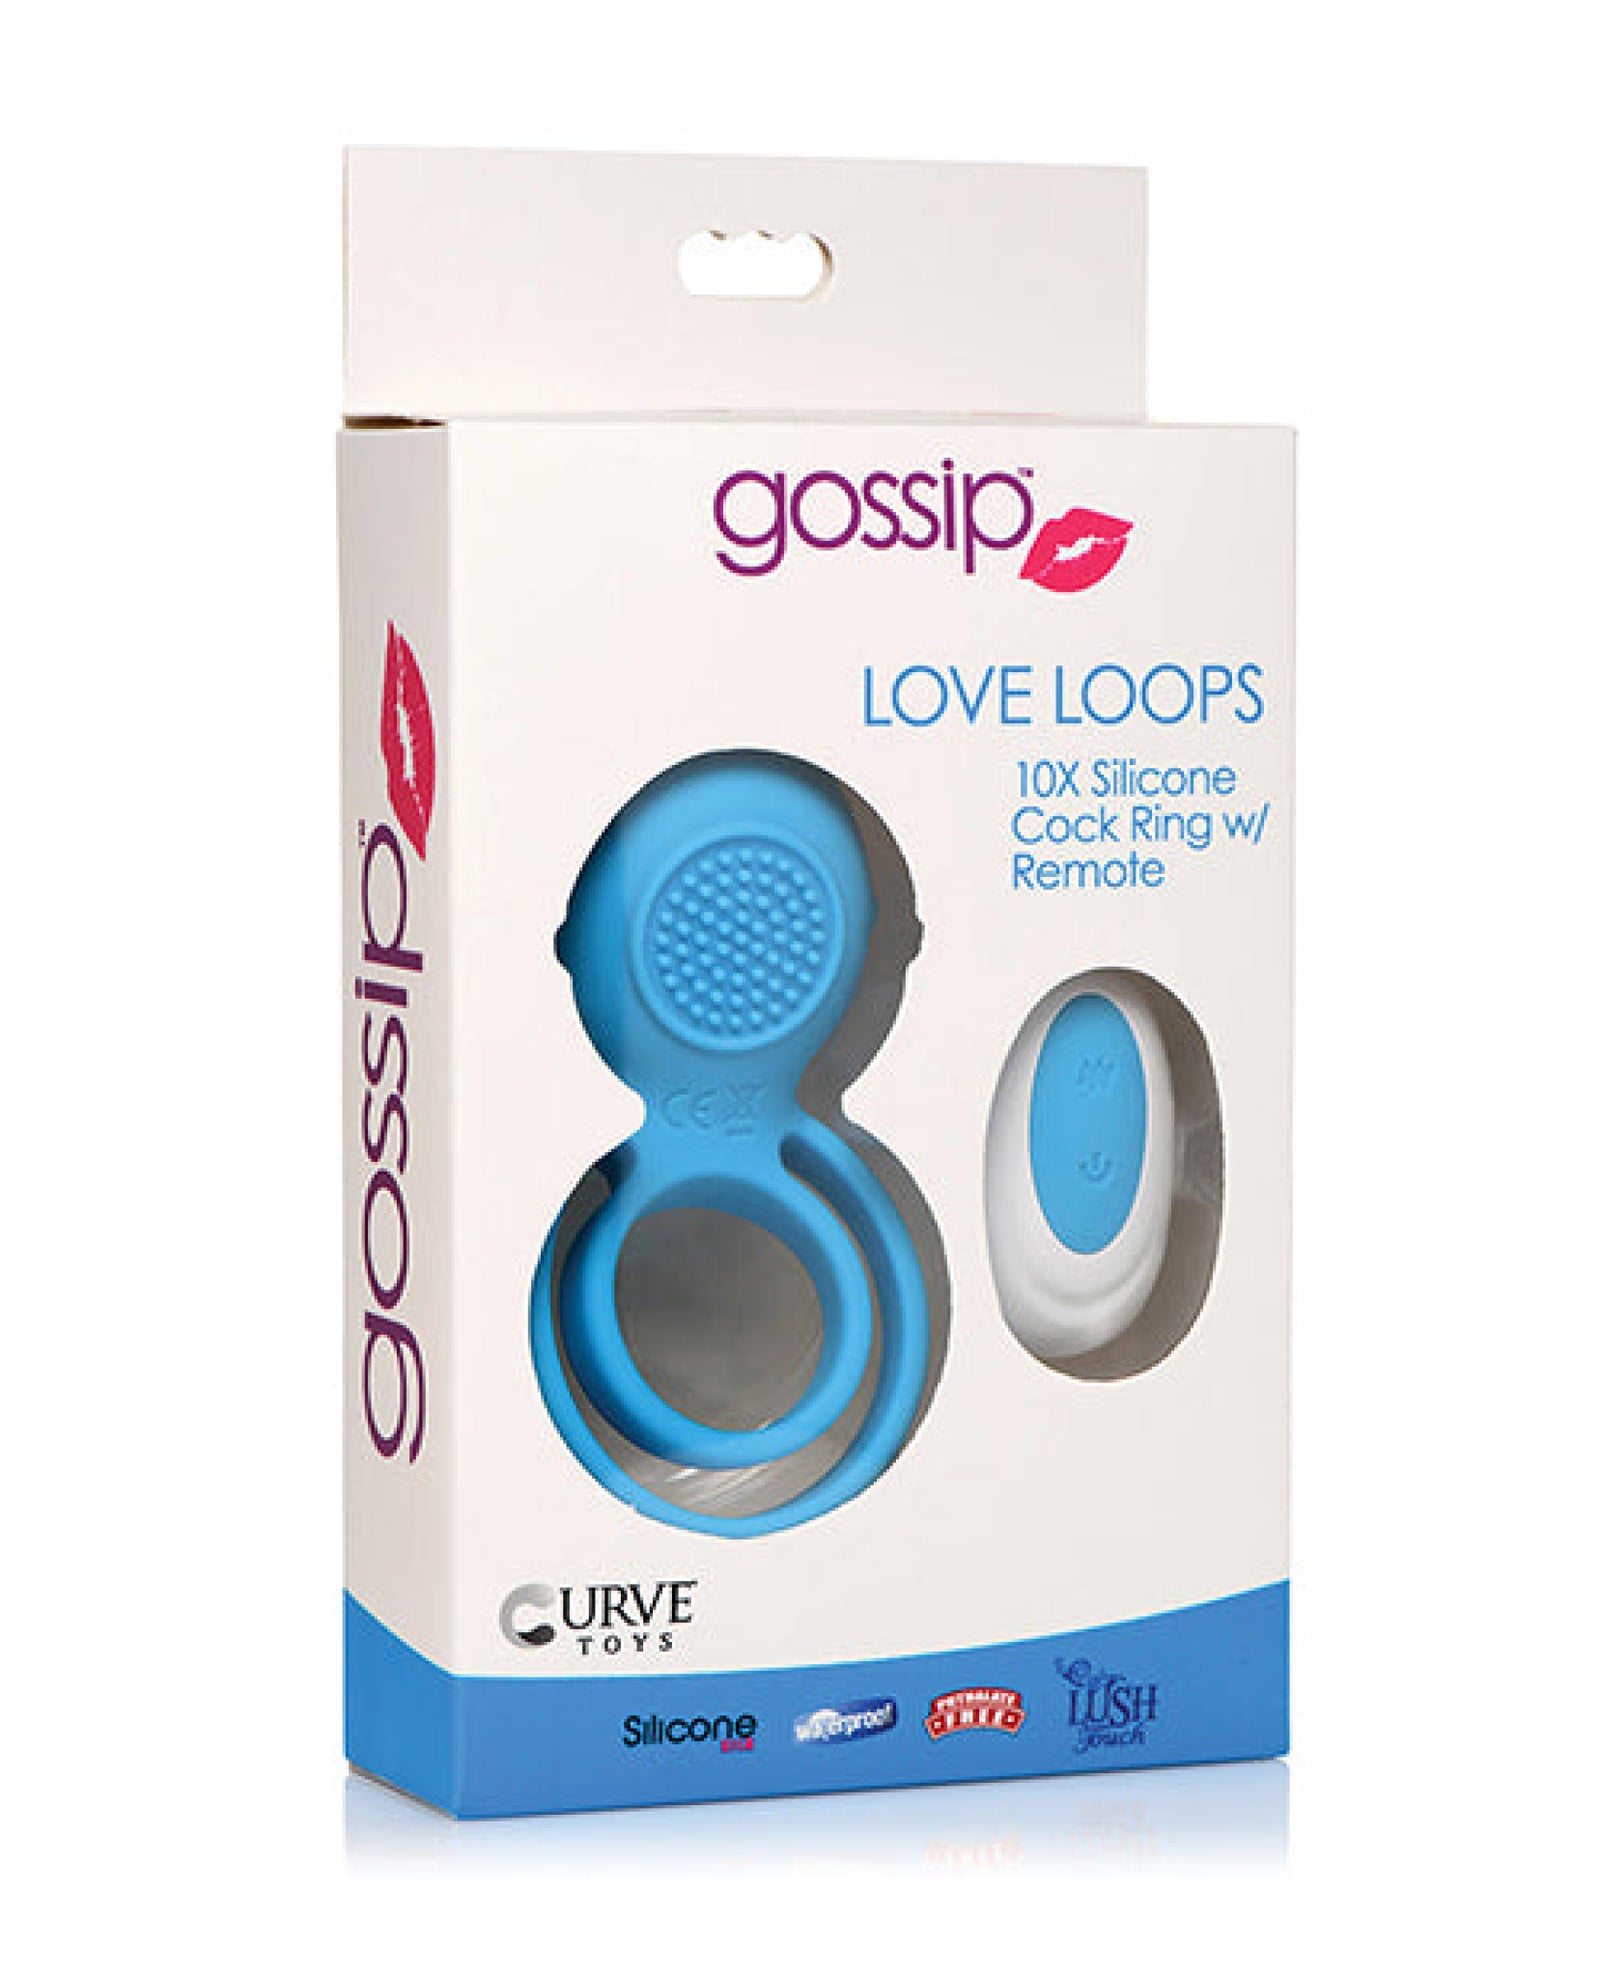 Curve Toys Gossip Love Loops 10x Silicone Cock Ring W/remote Curve Toys